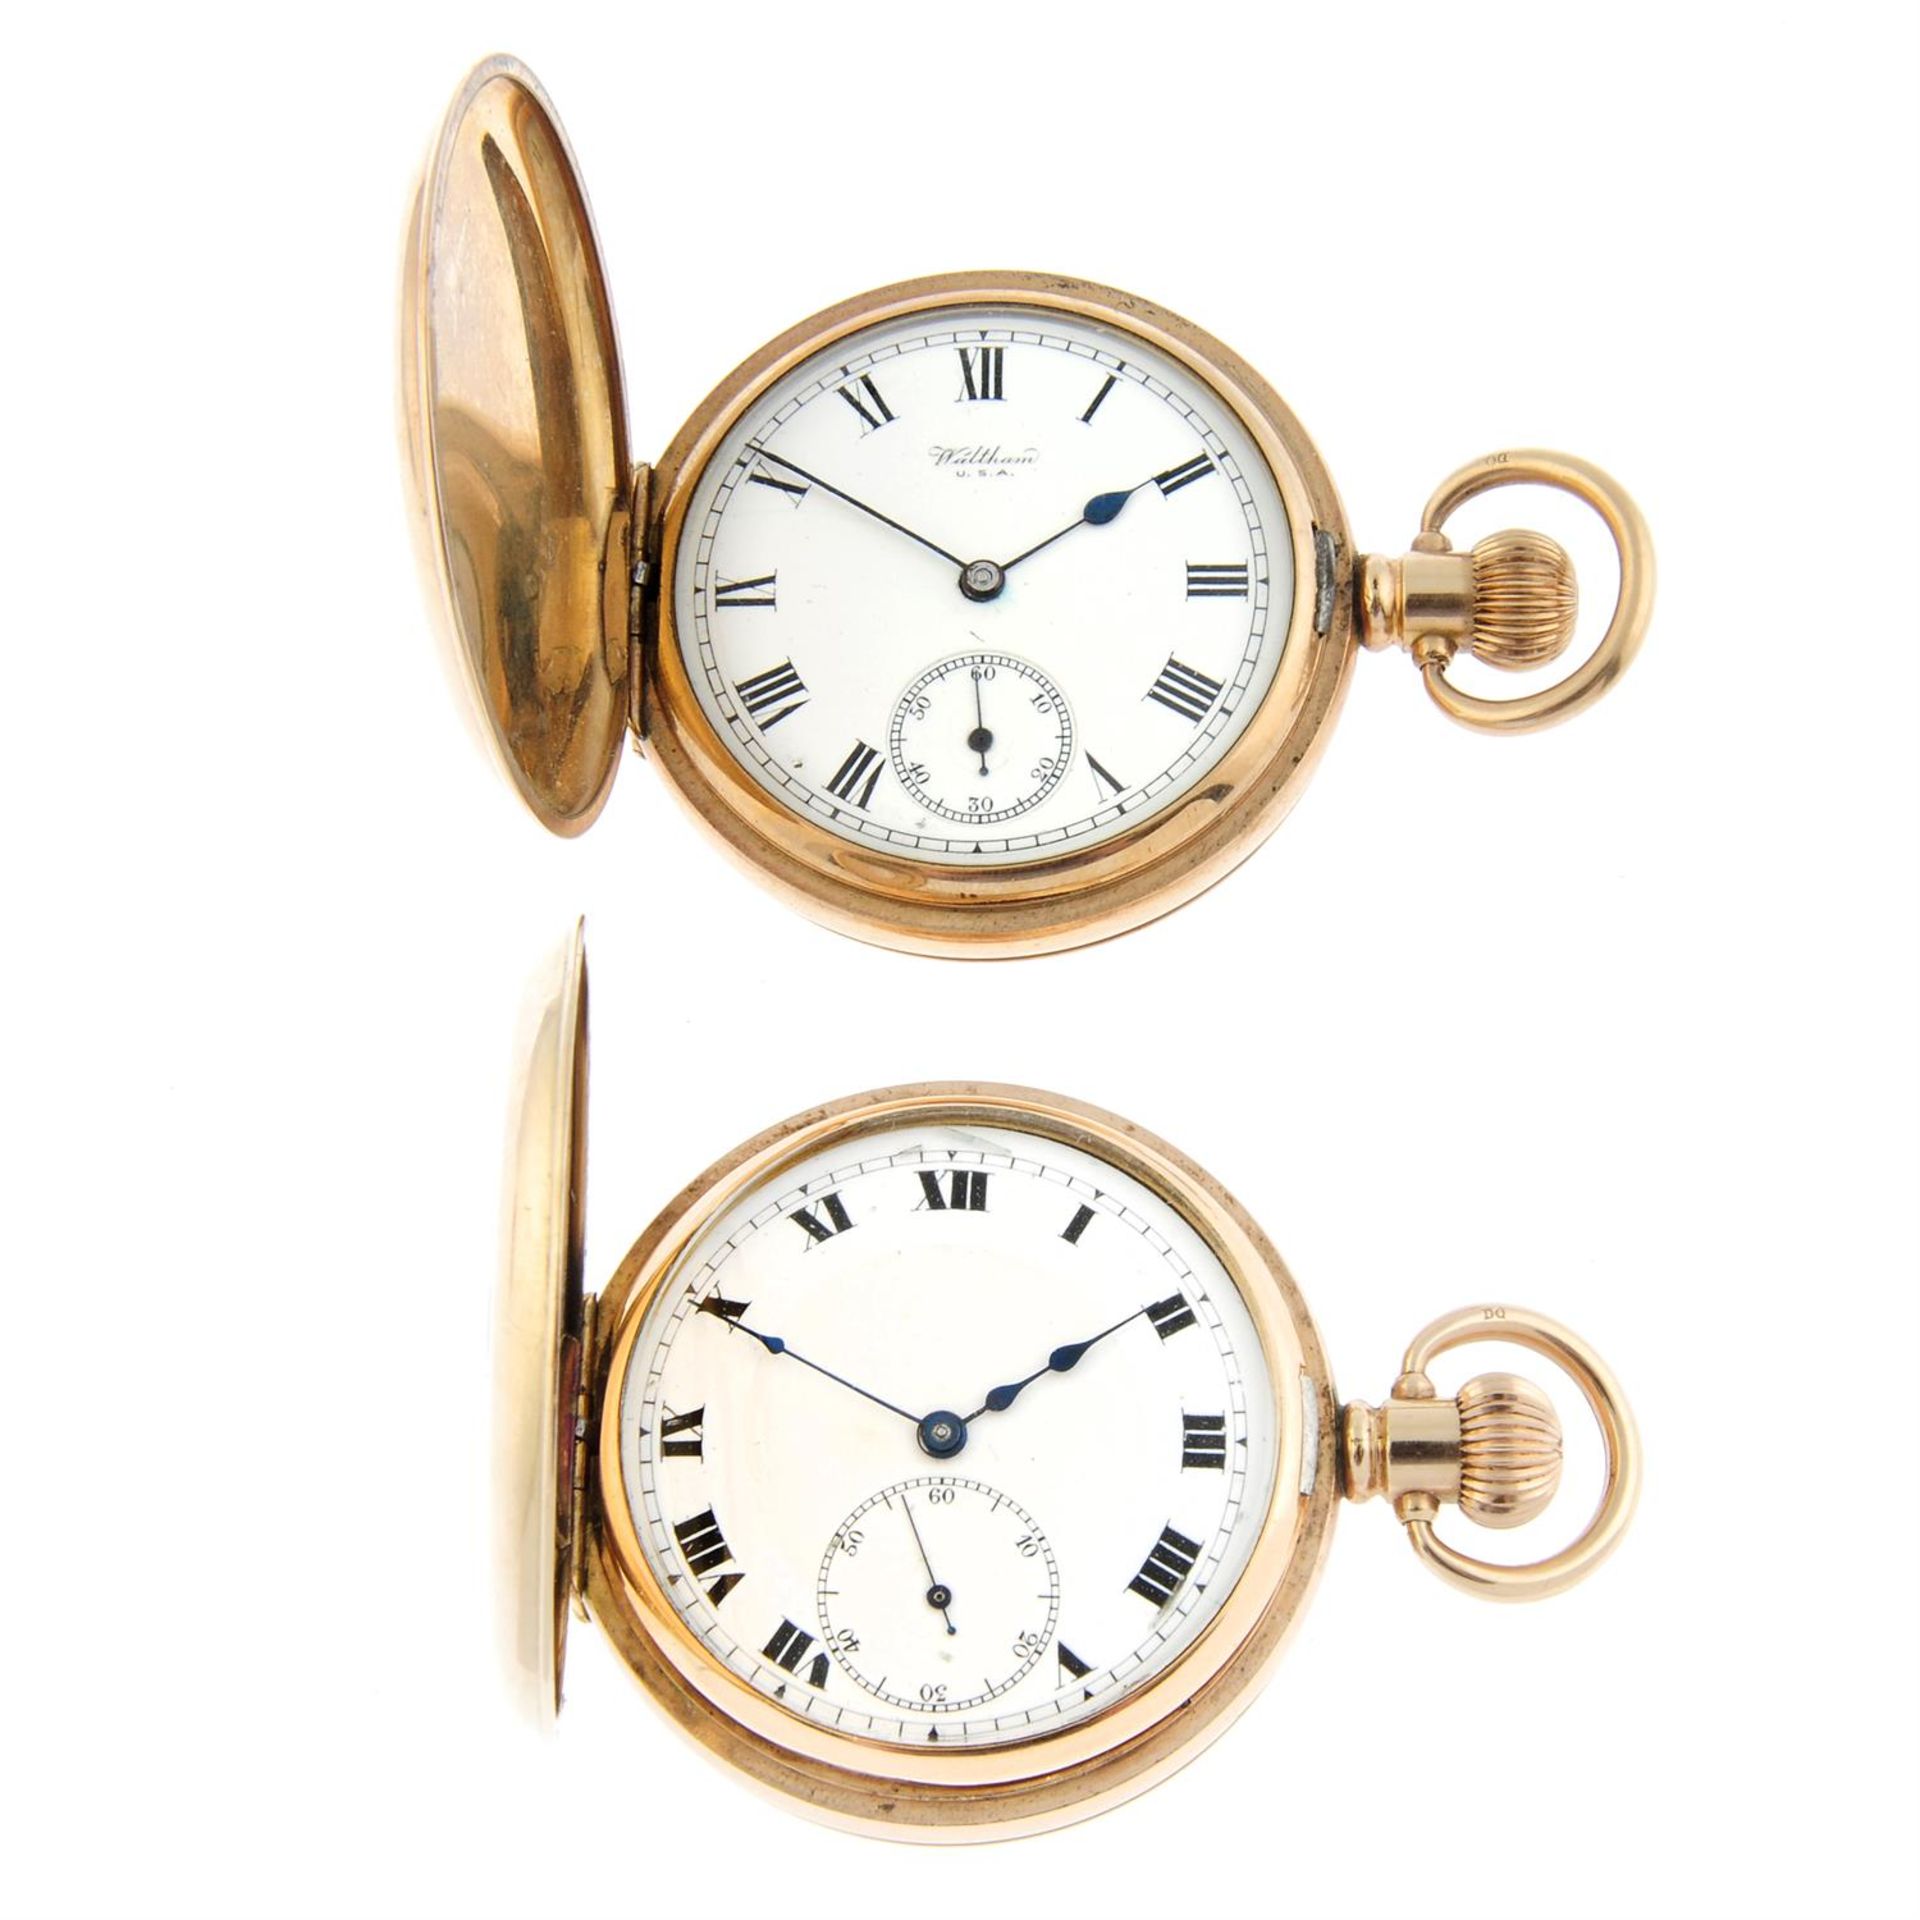 A gold plated half hunter pocket watch by Buren (50mm) with a gold plated full hunter pocket watch